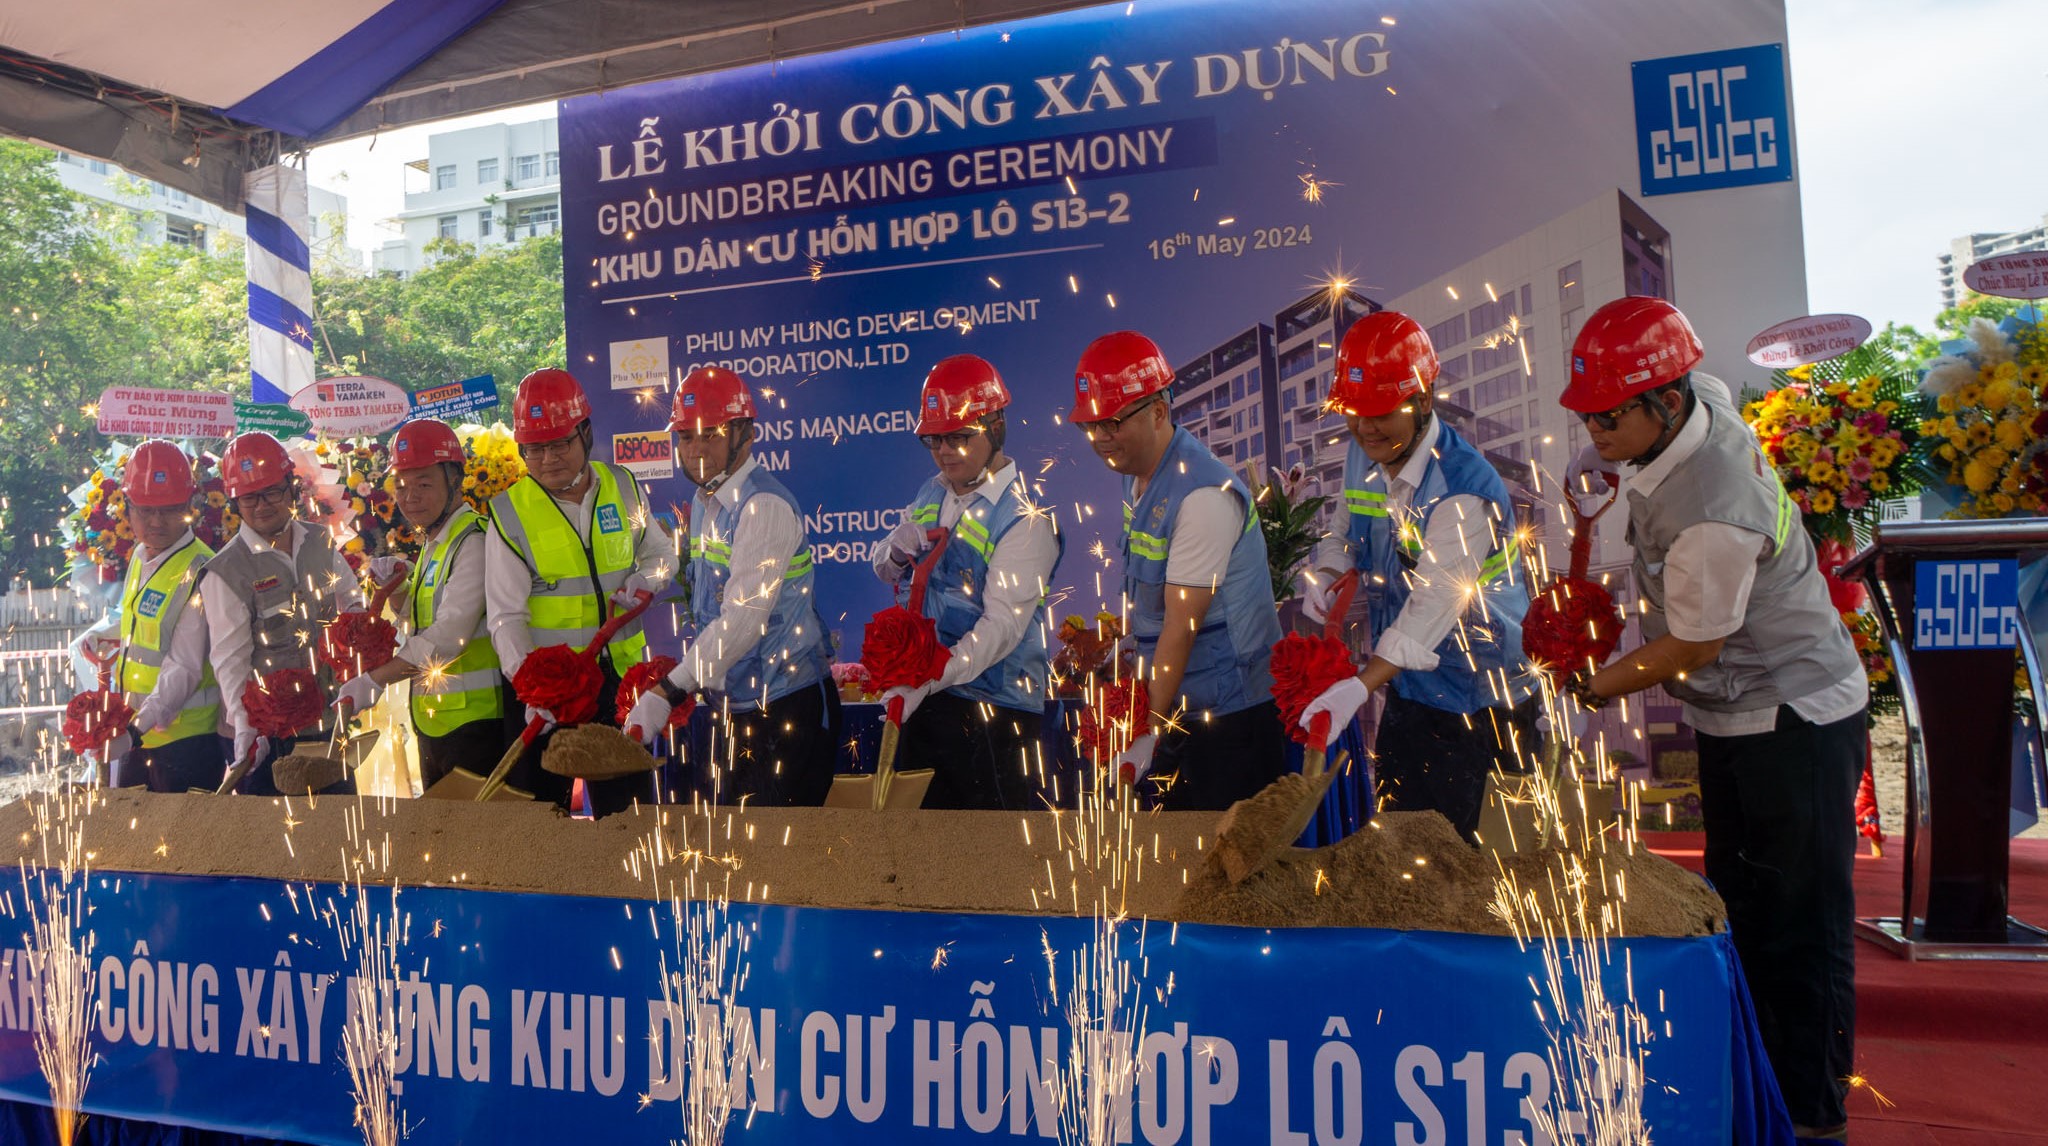 Series of construction has deployed in Phu My Hung City Center